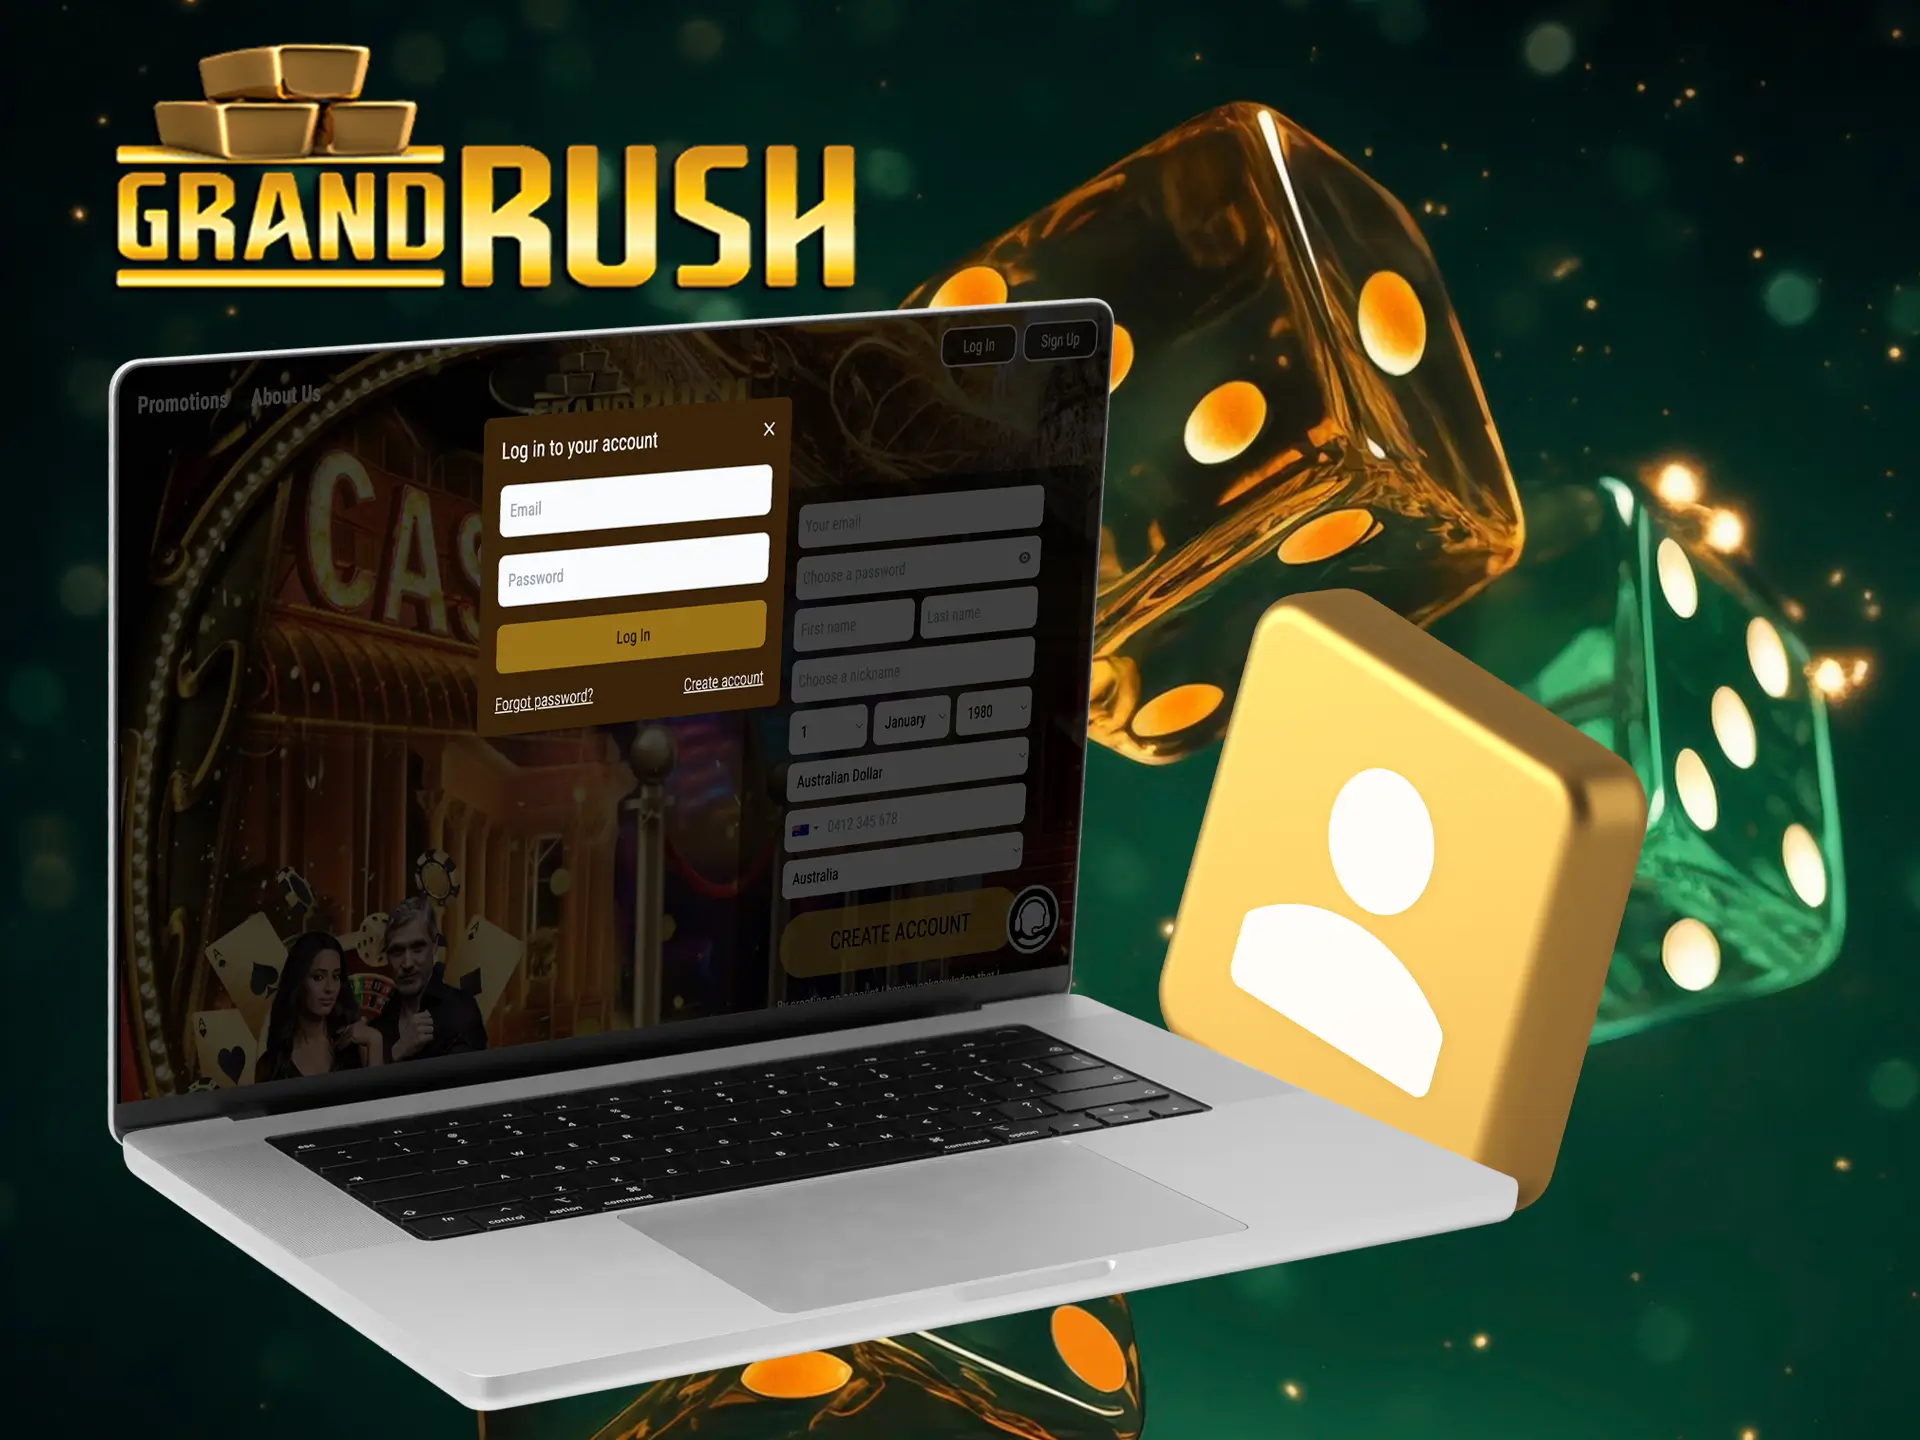 Use your email and password to log in to Grand Rush account.